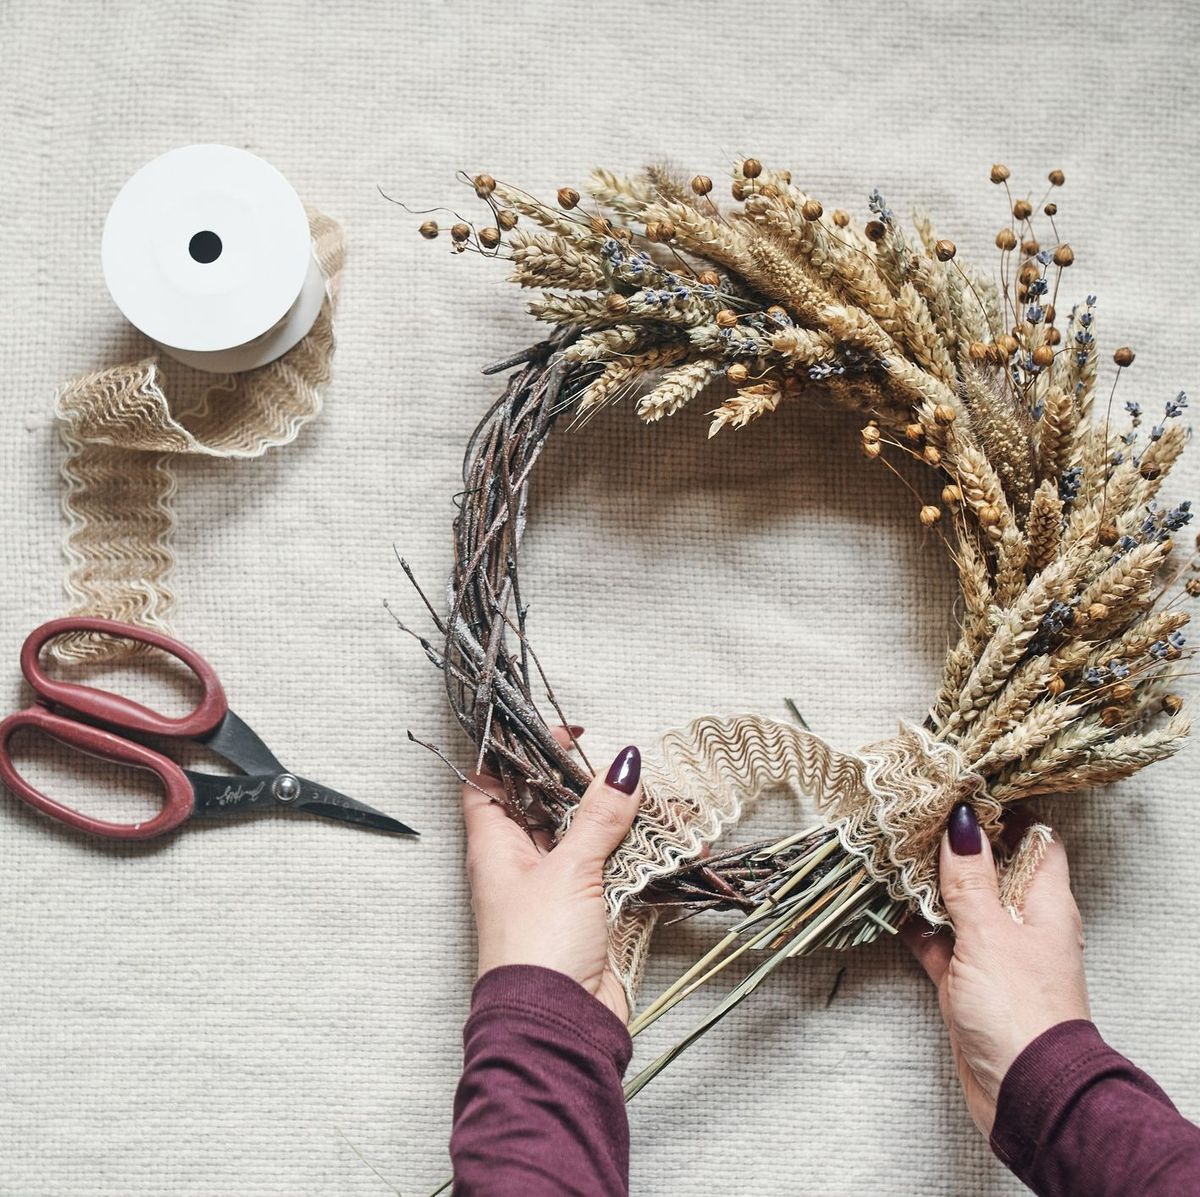 Fantastic Autumn Crafts for Adults to Make